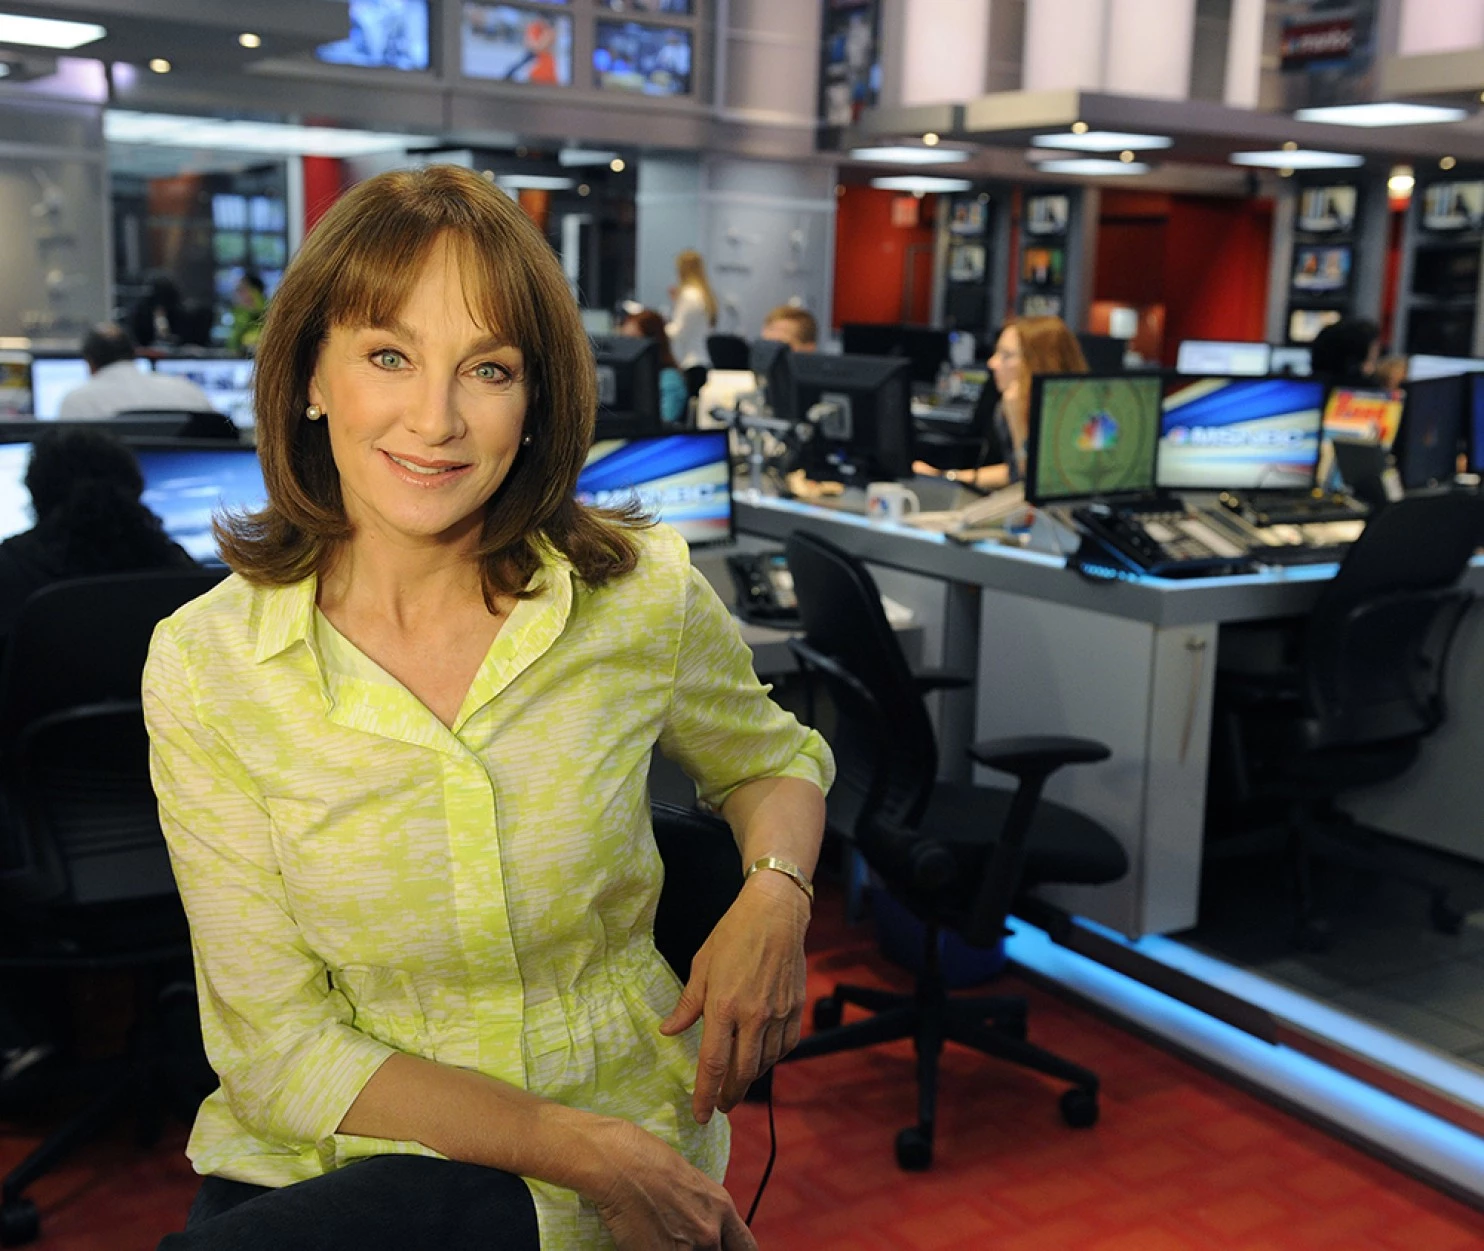 Dr. Nancy Snyderman Steps Down From NBC; Breach in Ebola Safety Quarantine Damaged Her Credibility Beyond Repair